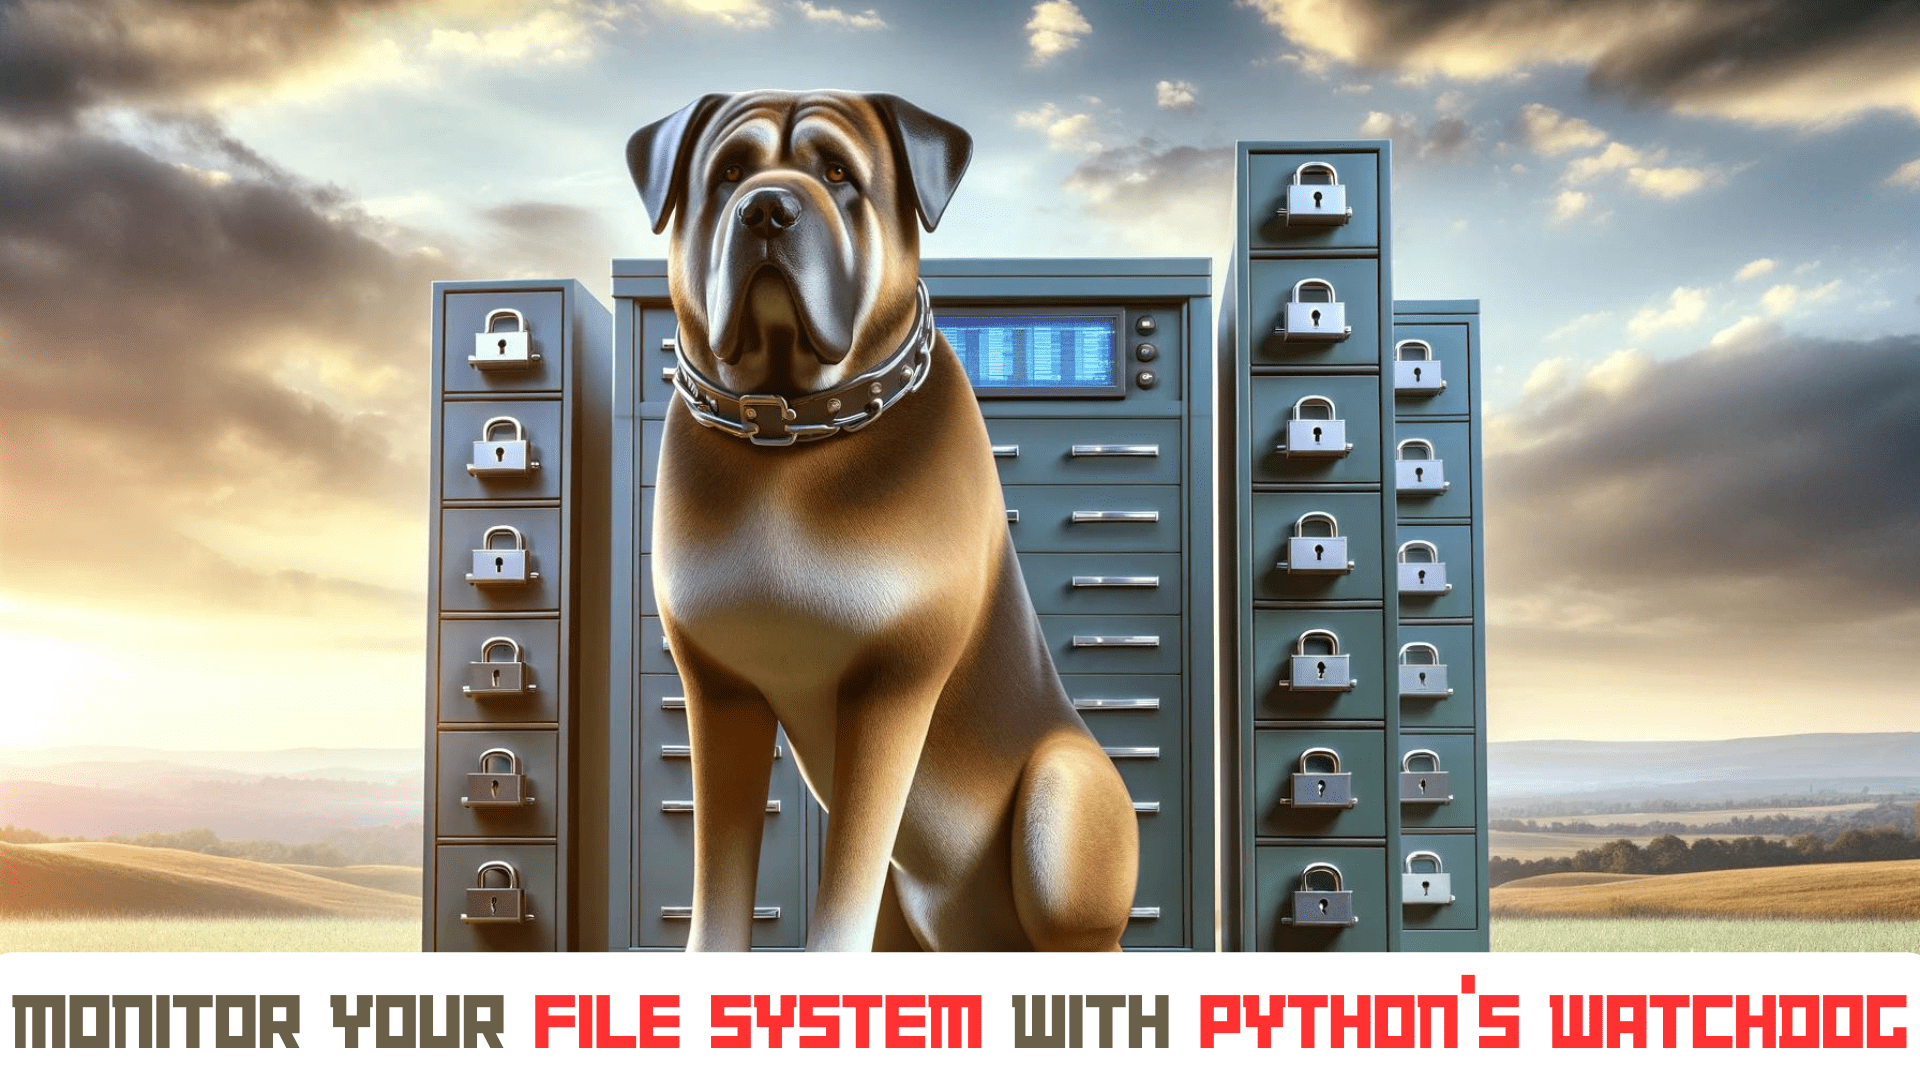 Monitor Your File System With Python’s Watchdog